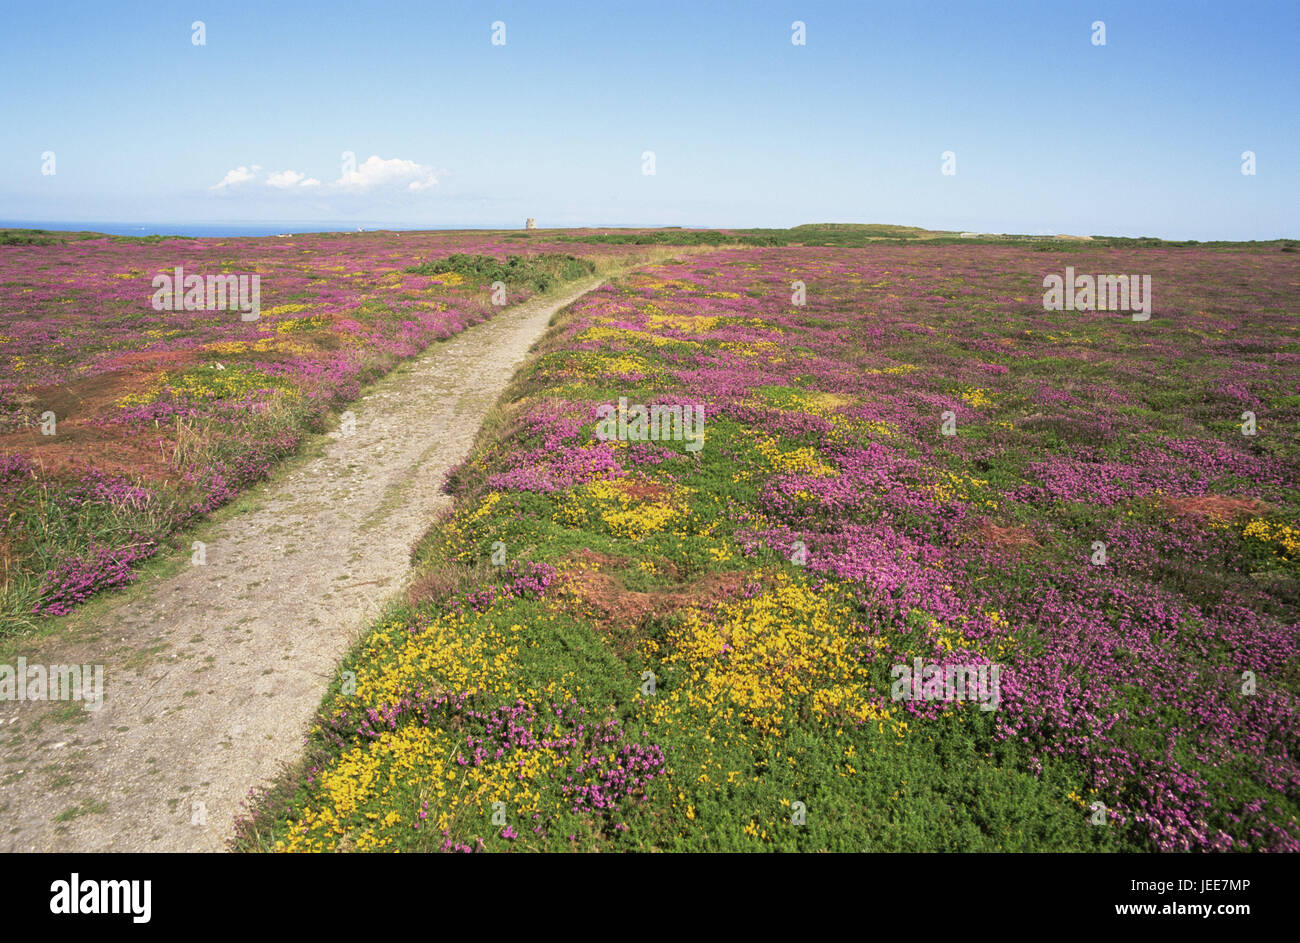 Great Britain, the Channel Islands, island Jersey, scenery, wild flowers, blossom, way, Europe, nature, vegetation, width, far, view, horizon, meadows, flowers, heather, gorse, bell moor, period of bloom, sea of blossom, magenta, yellow, outside, deserted, Stock Photo